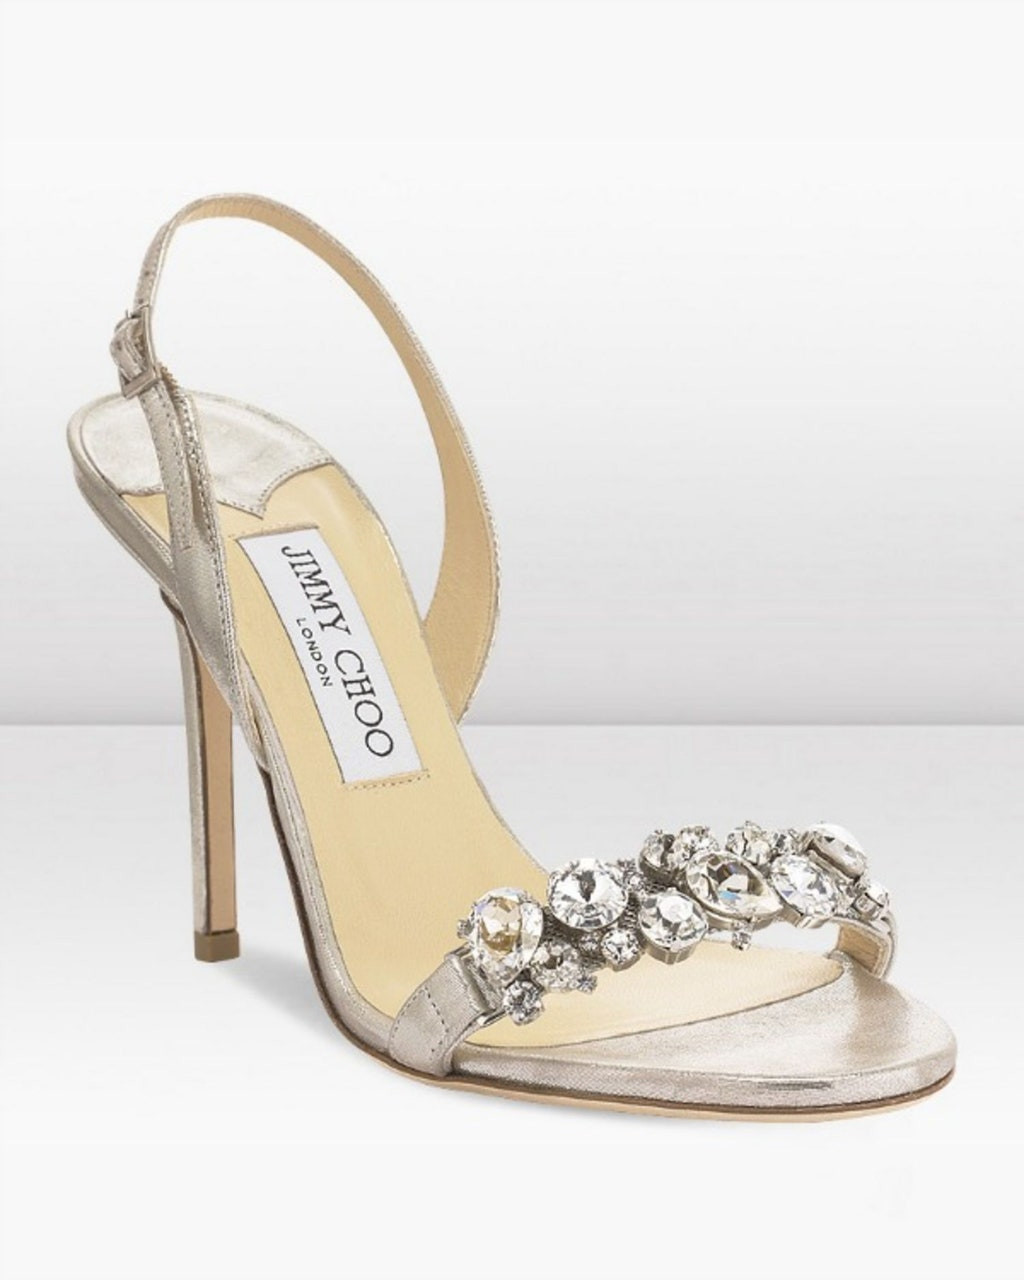 Jimmy Choo Shoes Wedding
 5 Pairs of Over the Top Wedding Shoes Which Would You